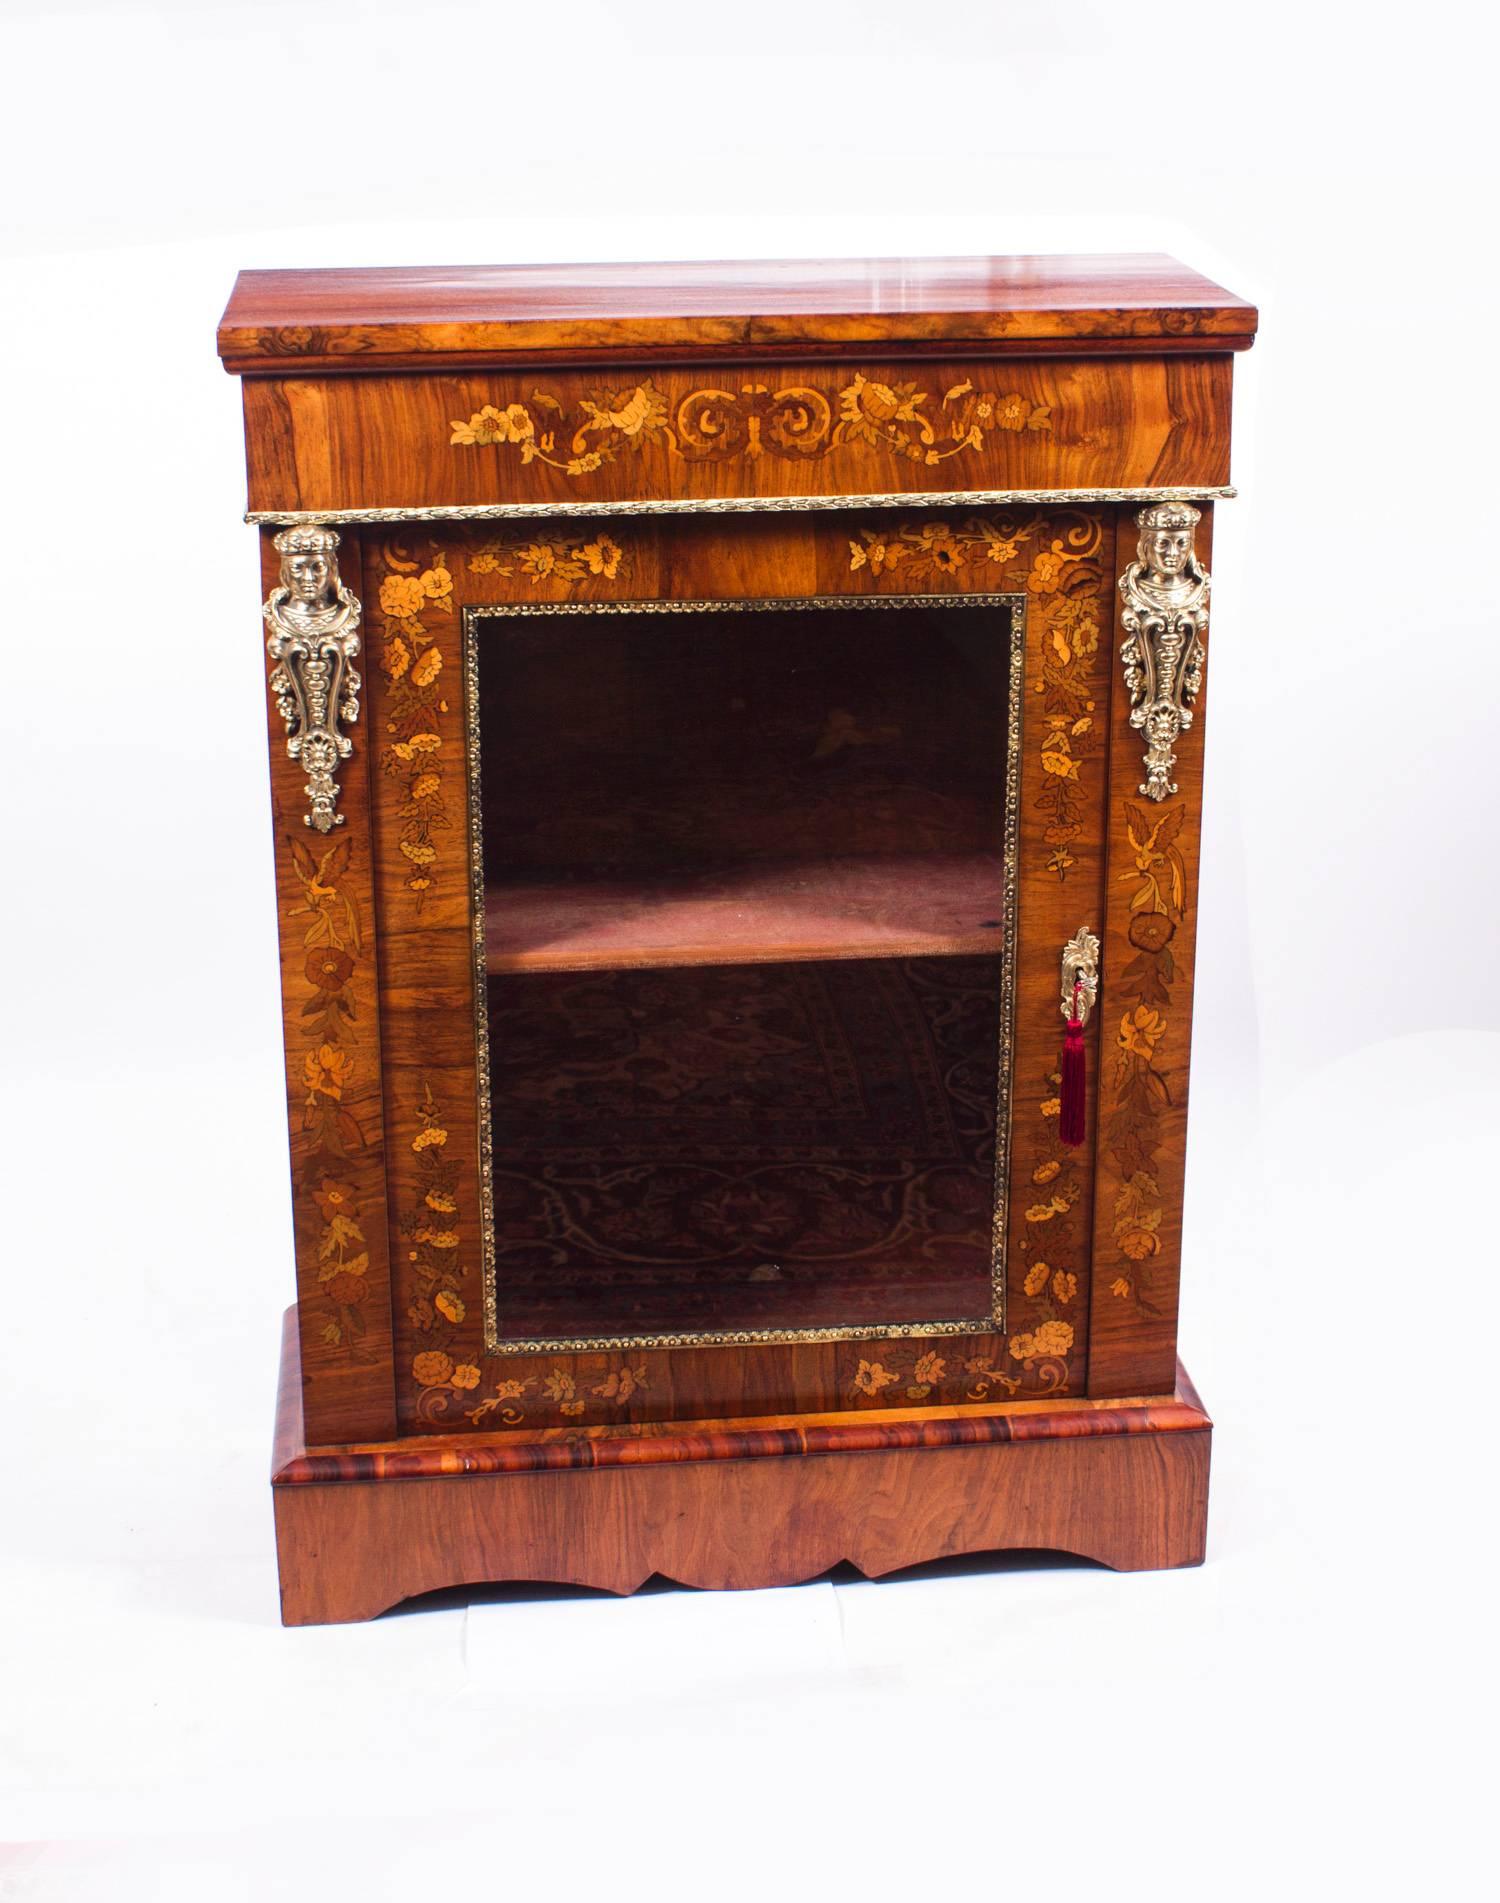 This is a magnificent antique pair of Victorian burr walnut and floral marquetry pier cabinets, circa 1870 in date.

They are a genuine pair - which can be confirmed by the fact that the doors open one to the left and one to the right.

Adding to